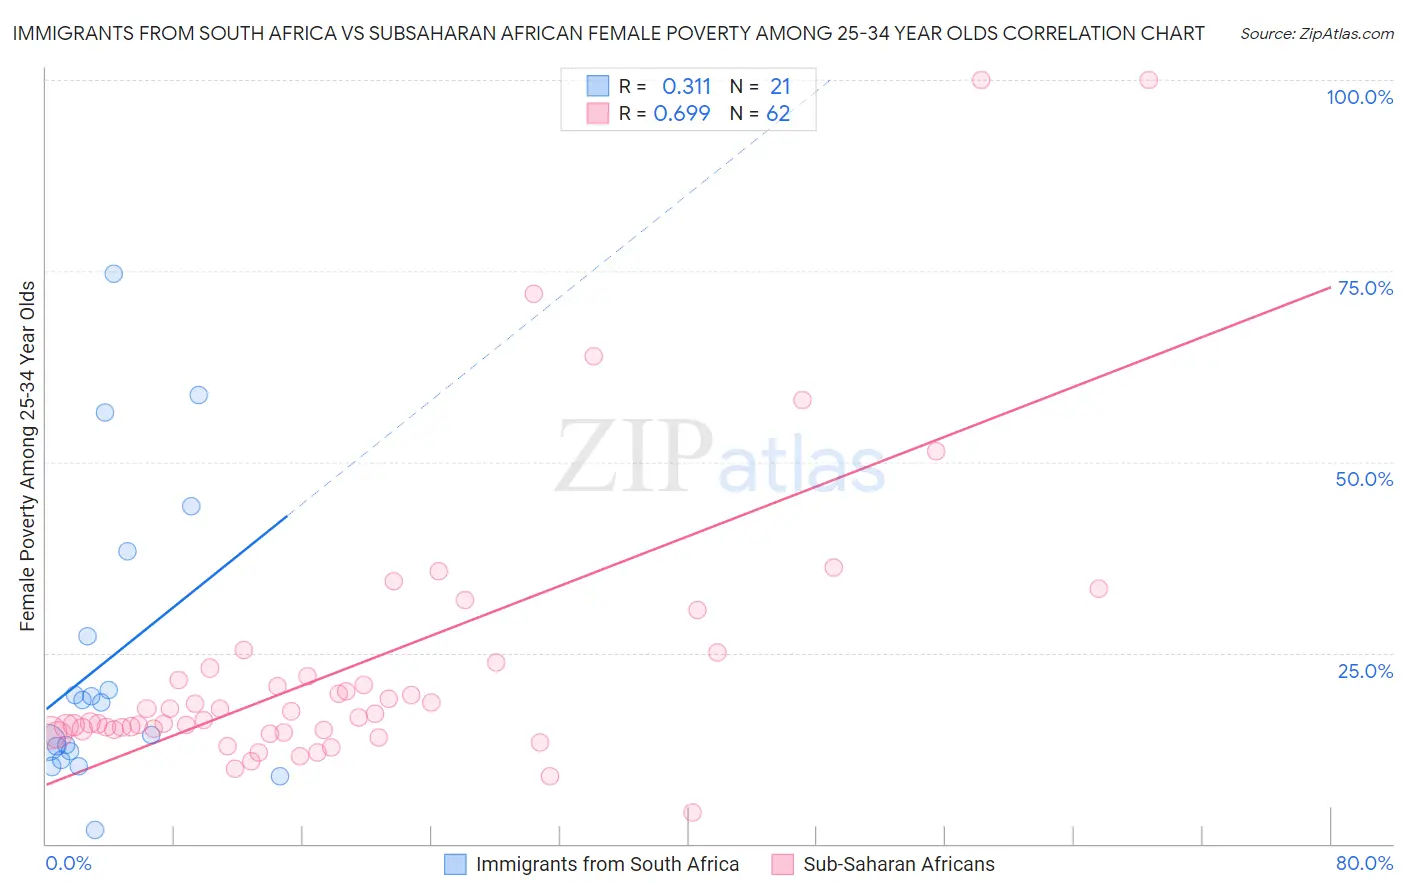 Immigrants from South Africa vs Subsaharan African Female Poverty Among 25-34 Year Olds